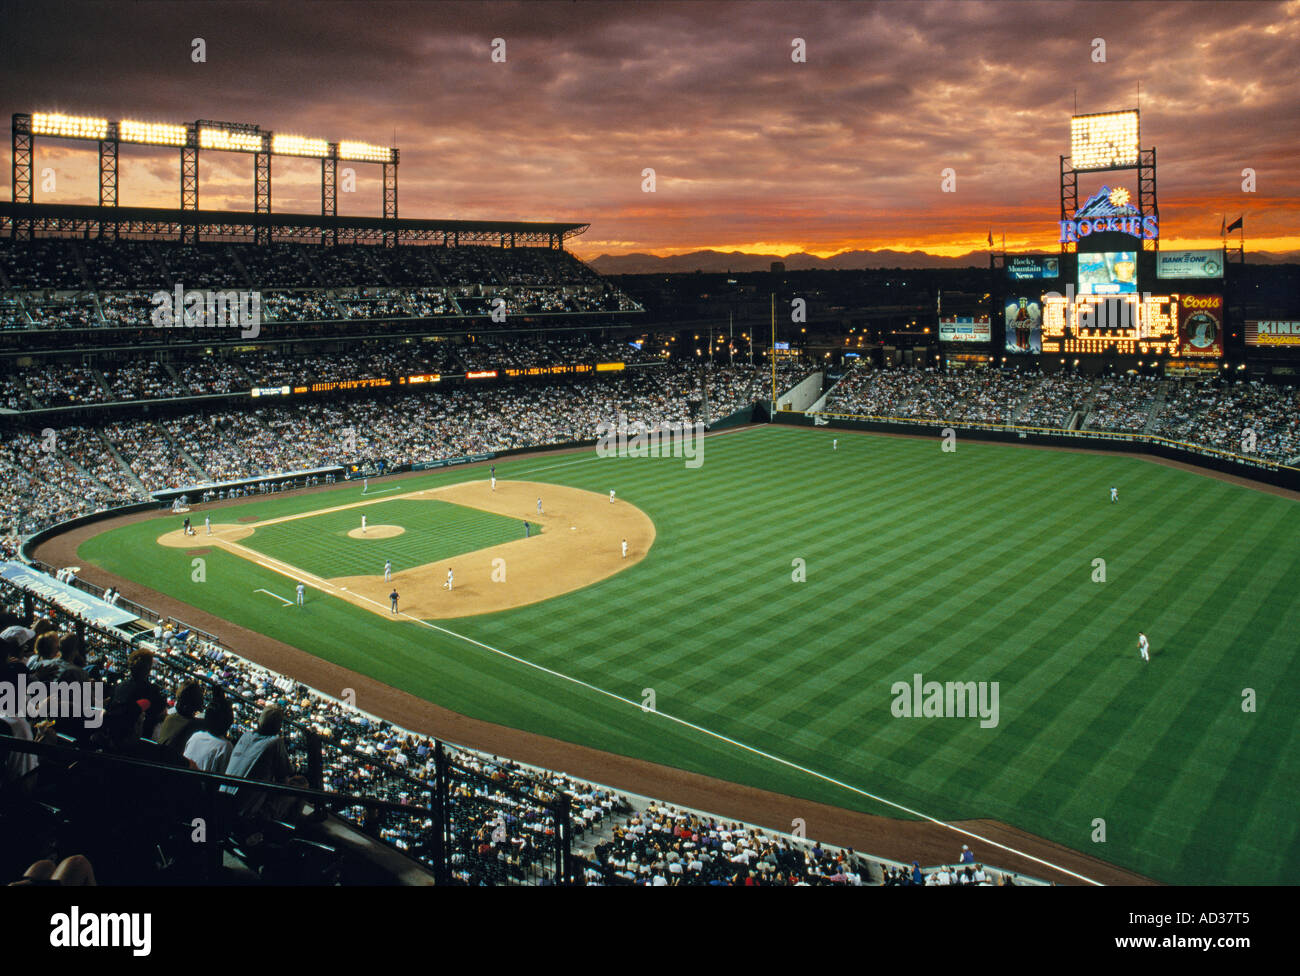 Colorado Rockies Blaze the HDR Trail With New Mountain-Size Videoboard at Coors  Field